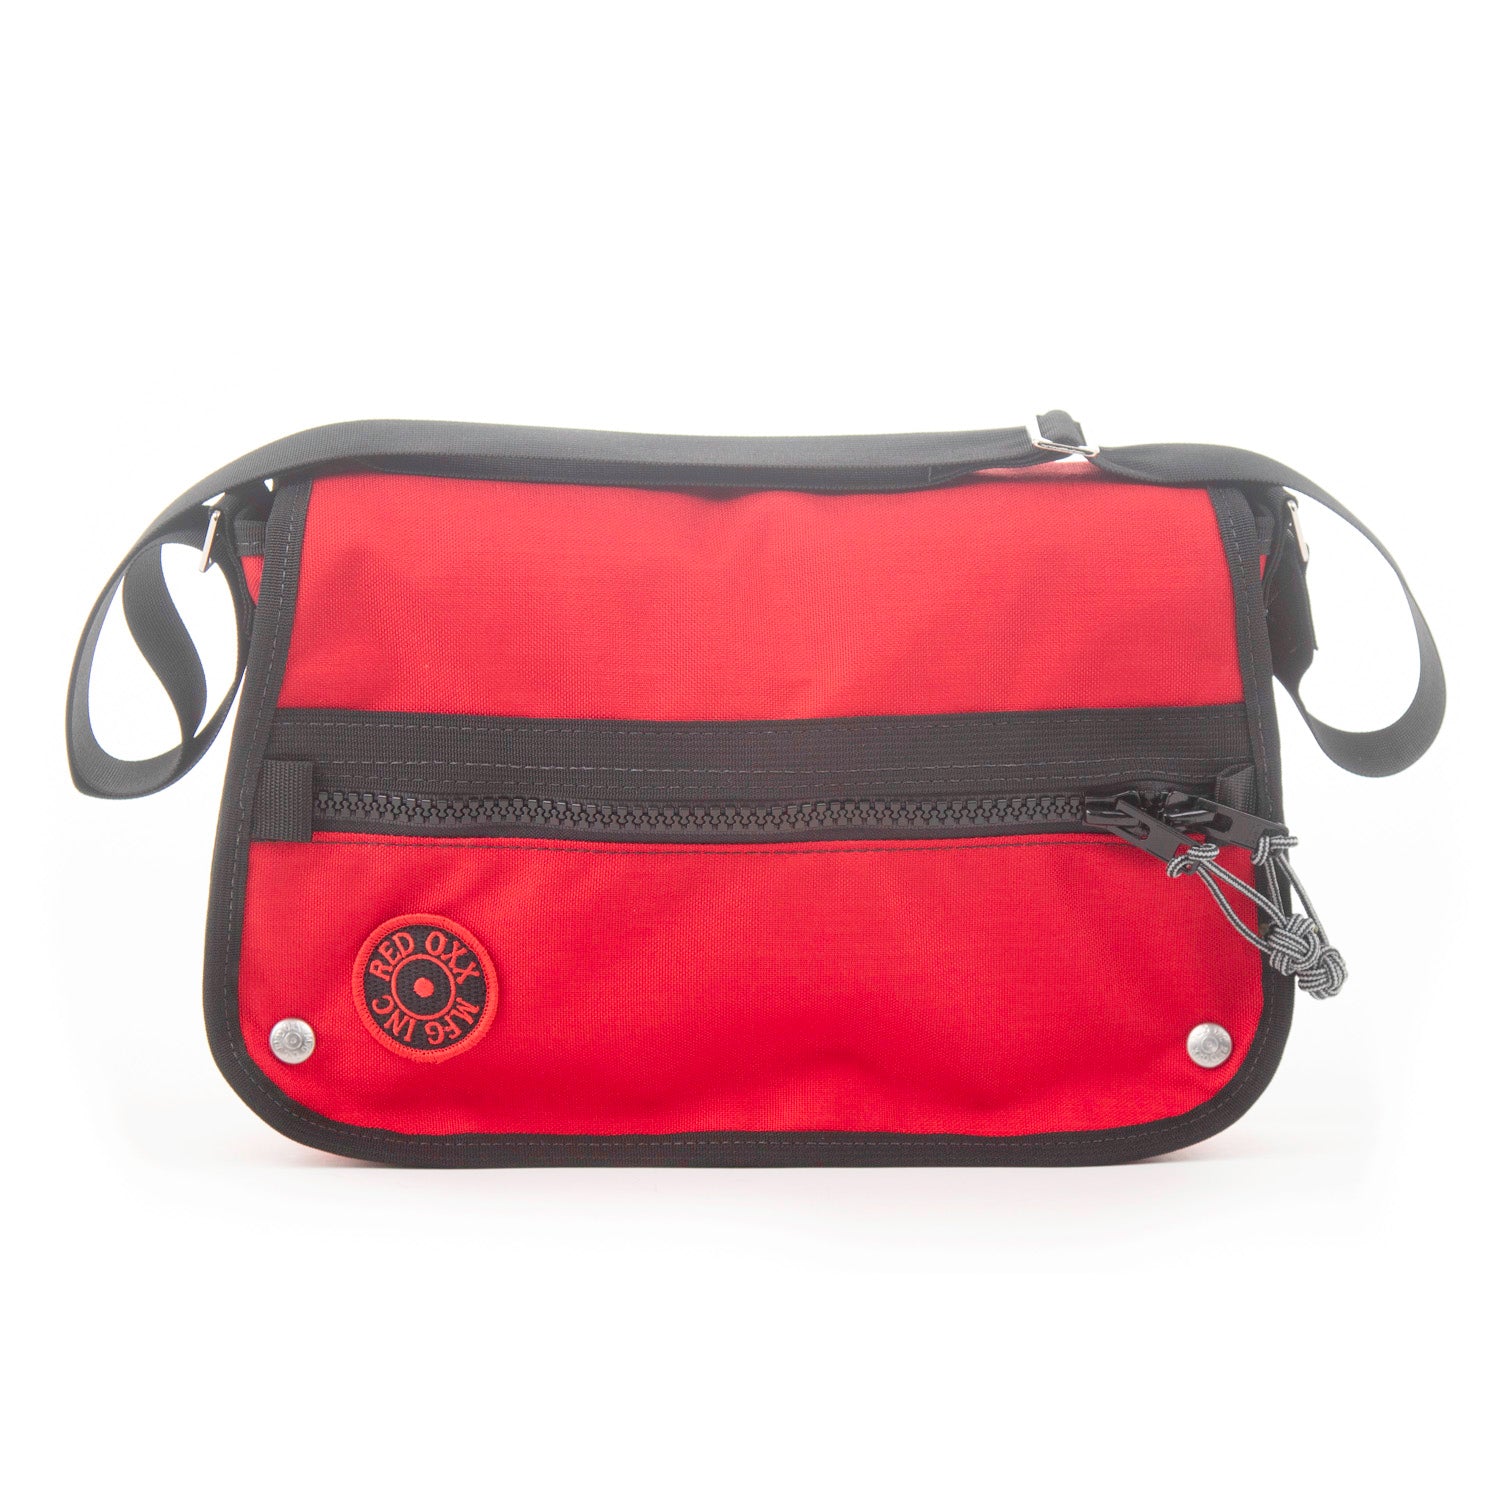 Full frontal view of mini messenger bag with Red Oxx logo. 